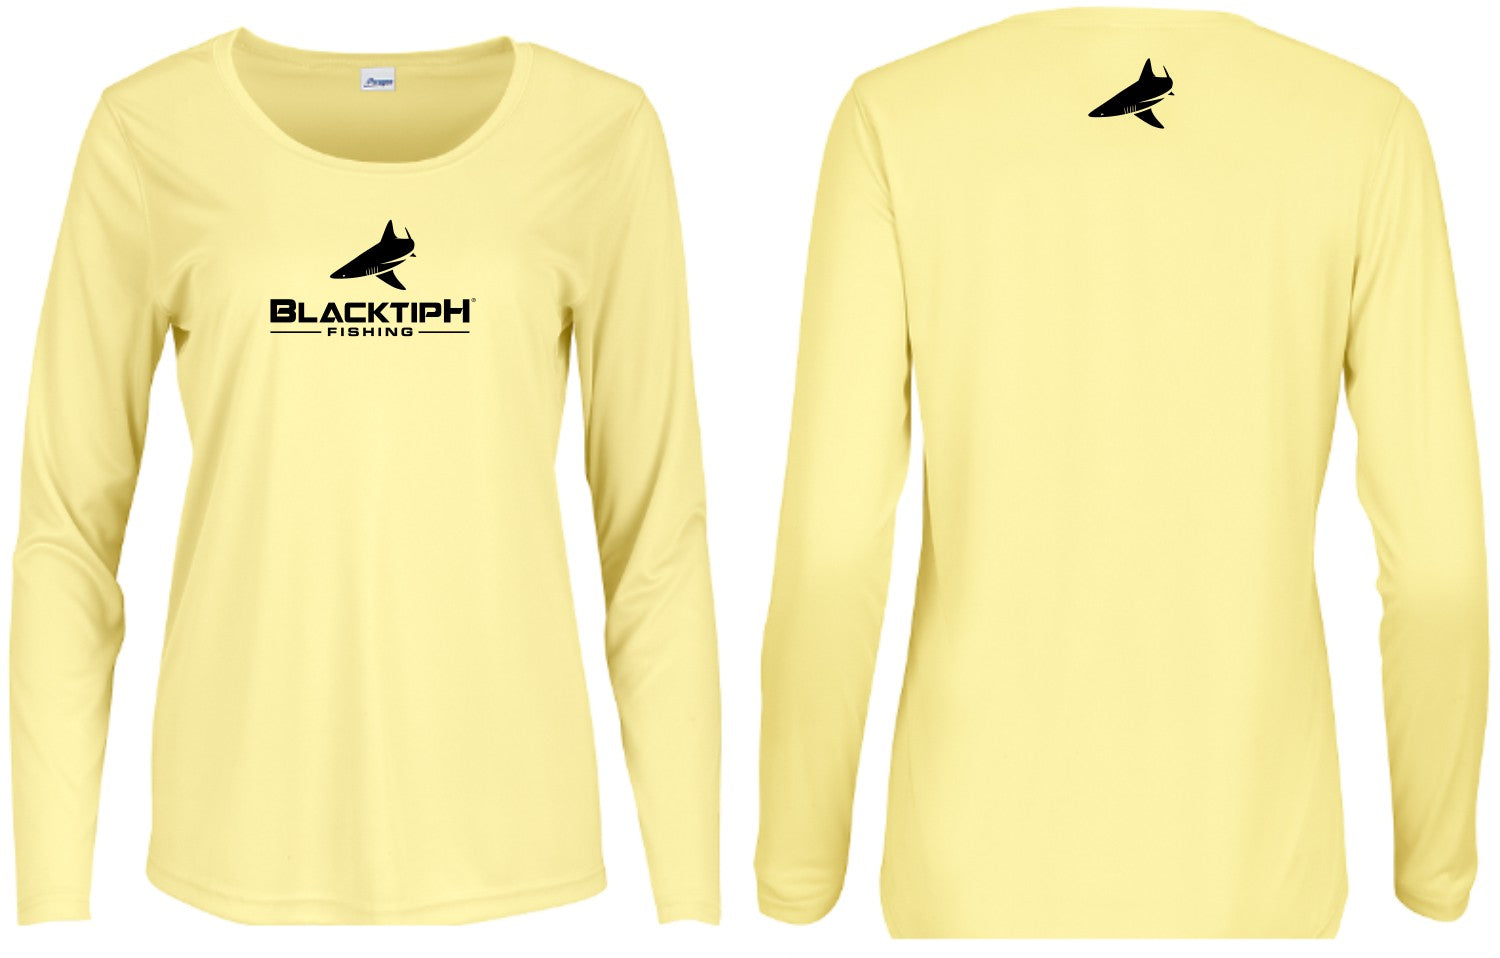 BlacktipH Ladies Performance Long Sleeve with UPF 50+ Protection, Medium / Pale Yellow